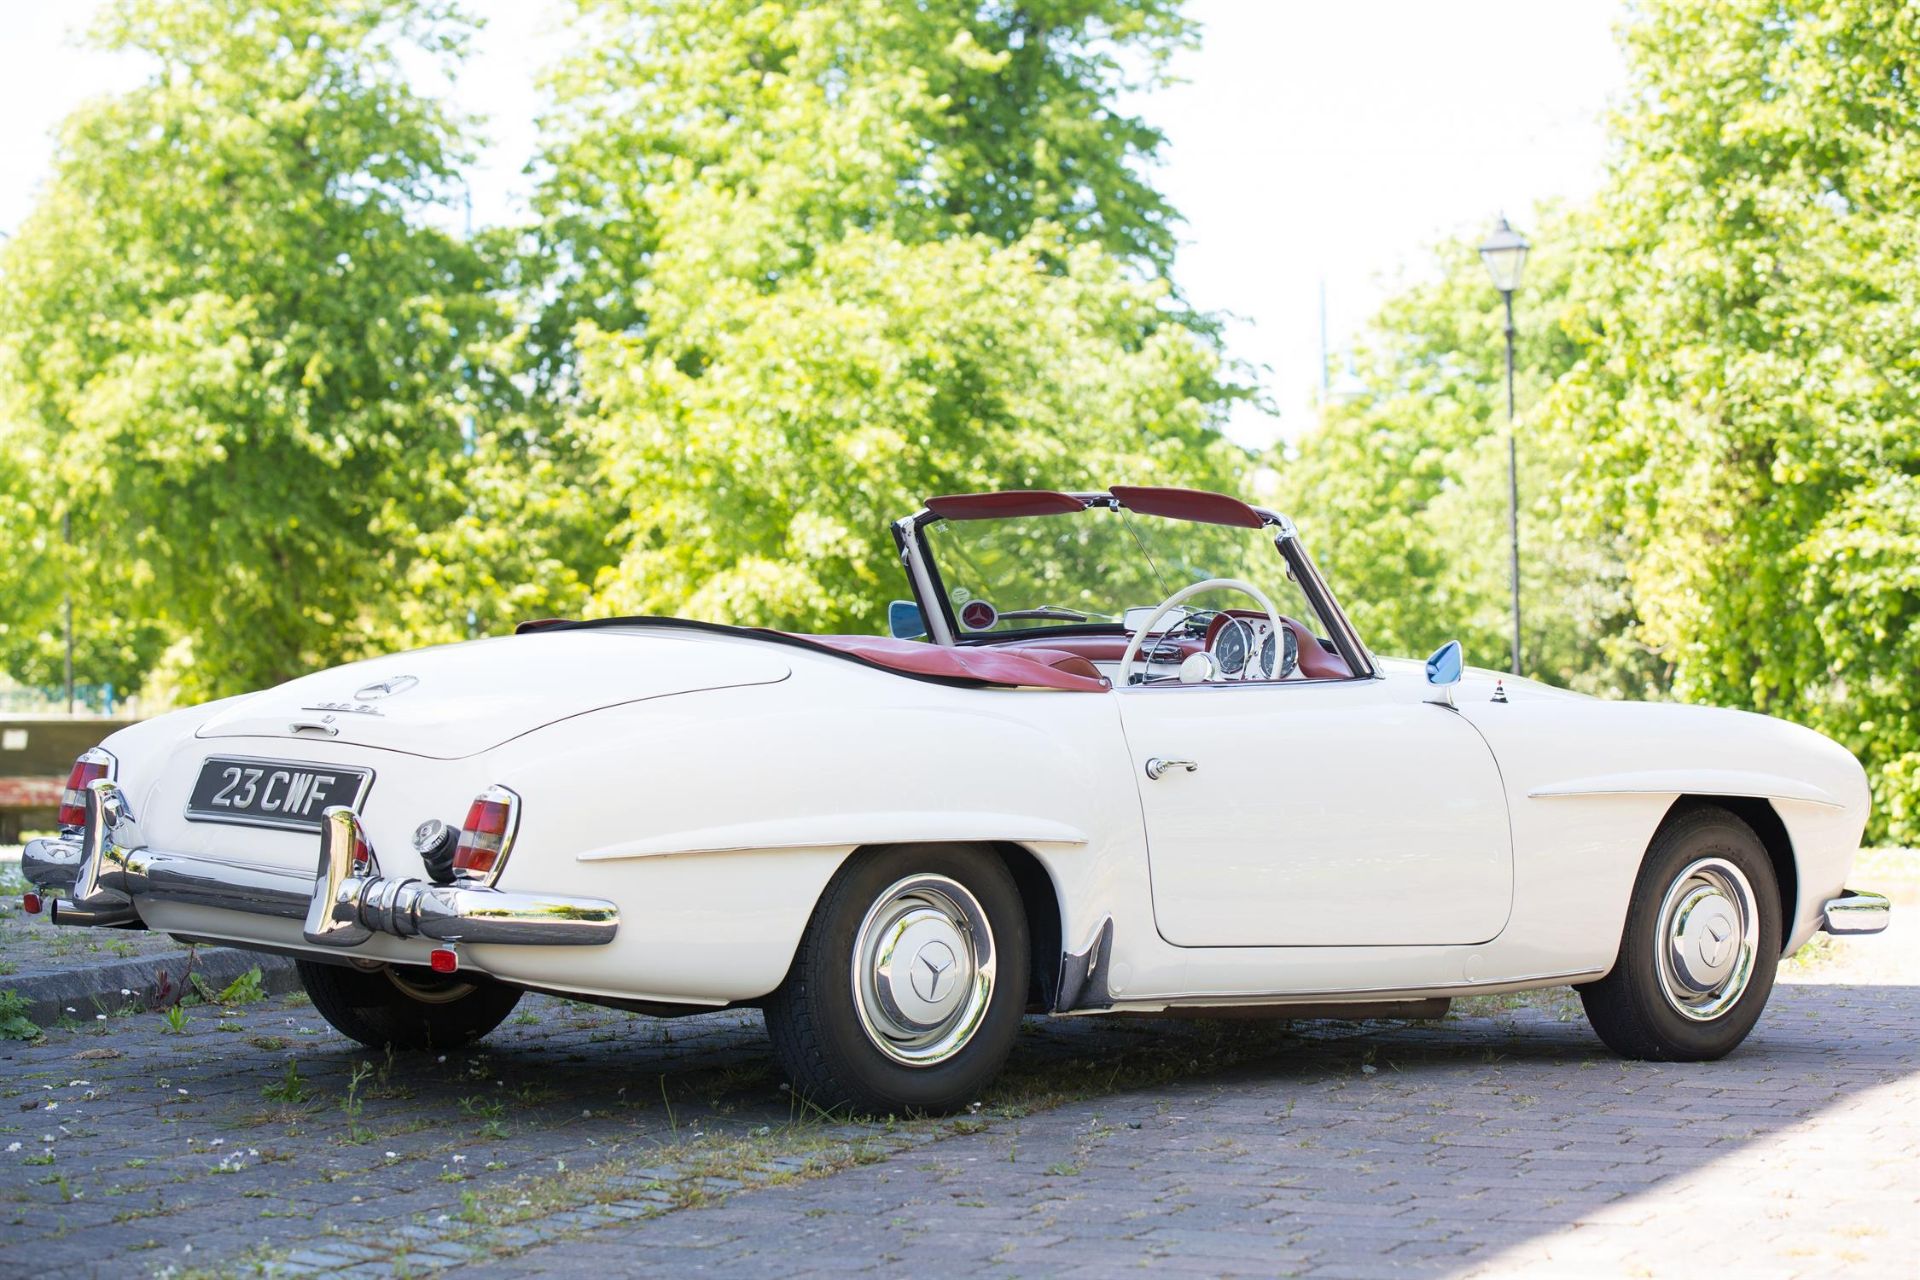 1962 Mercedes-Benz 190 SL with Hardtop - Right-Hand Drive - Image 7 of 19